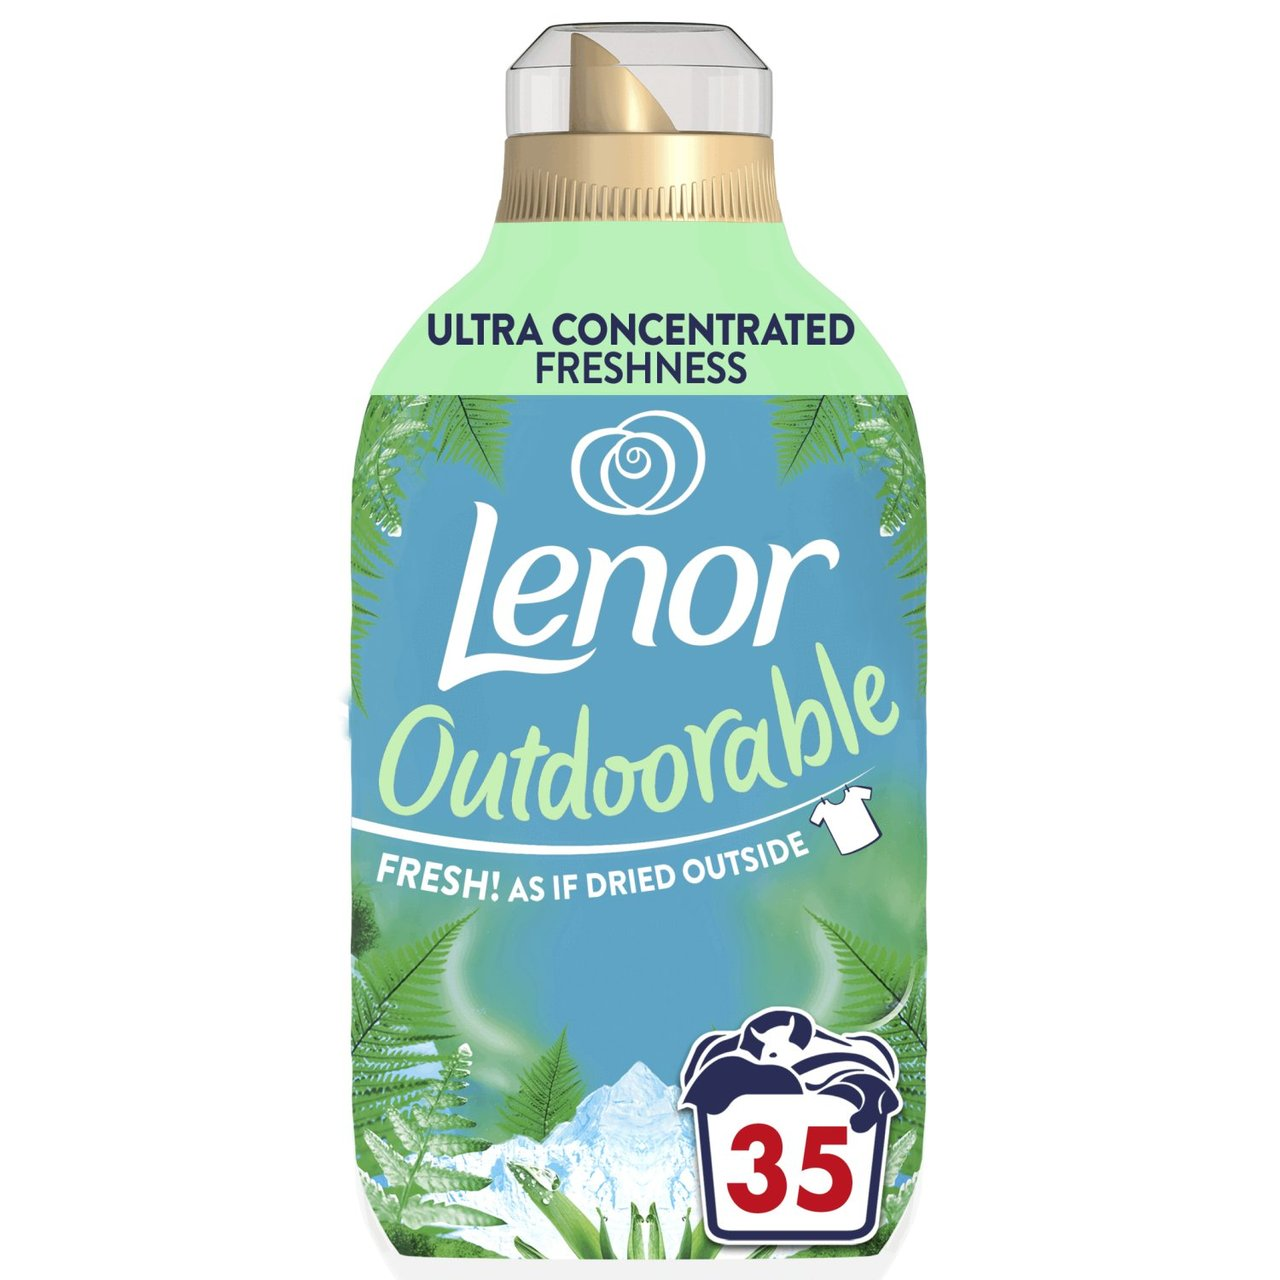 Lenor Outdoorable Fabric Conditioner Northern Solstice 490ml